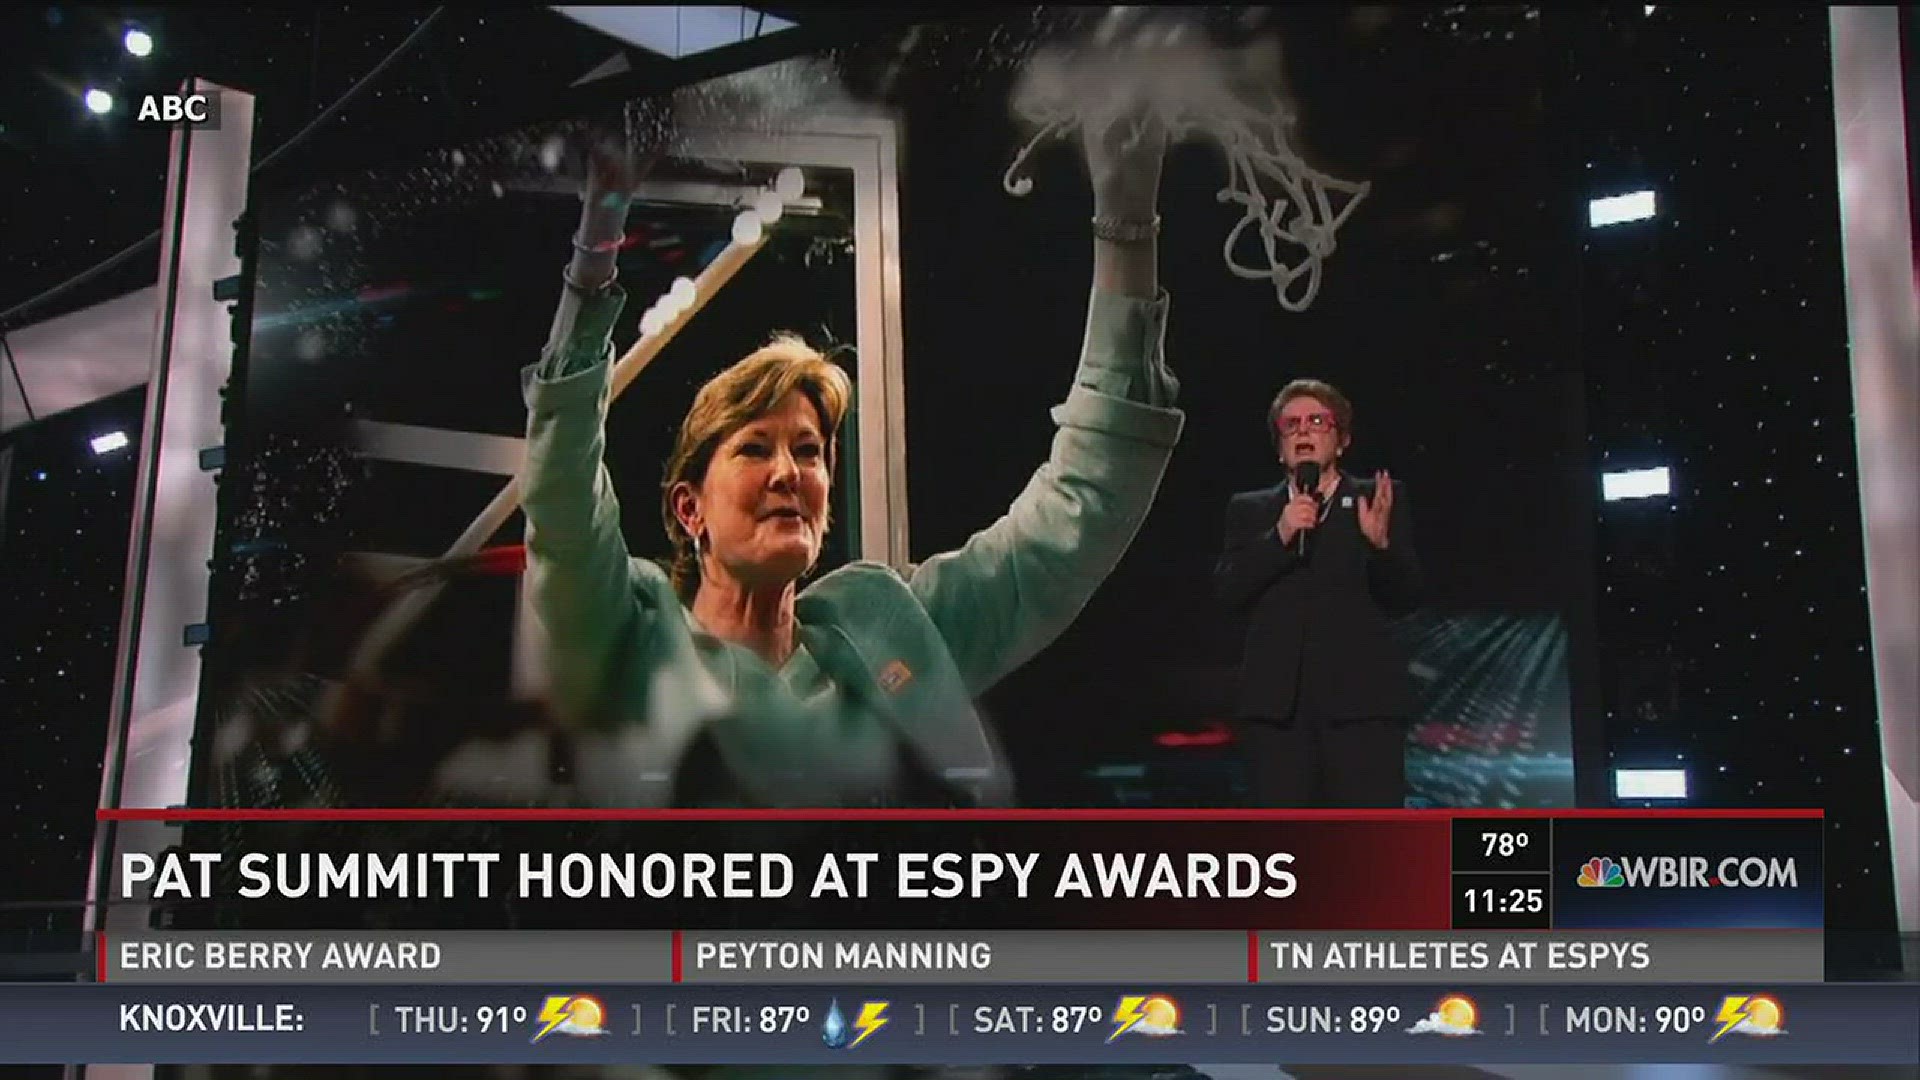 Former tennis player and equal rights for women advocate, Billie Jean King, pays tribute to Pat Summitt at the ESPYS.